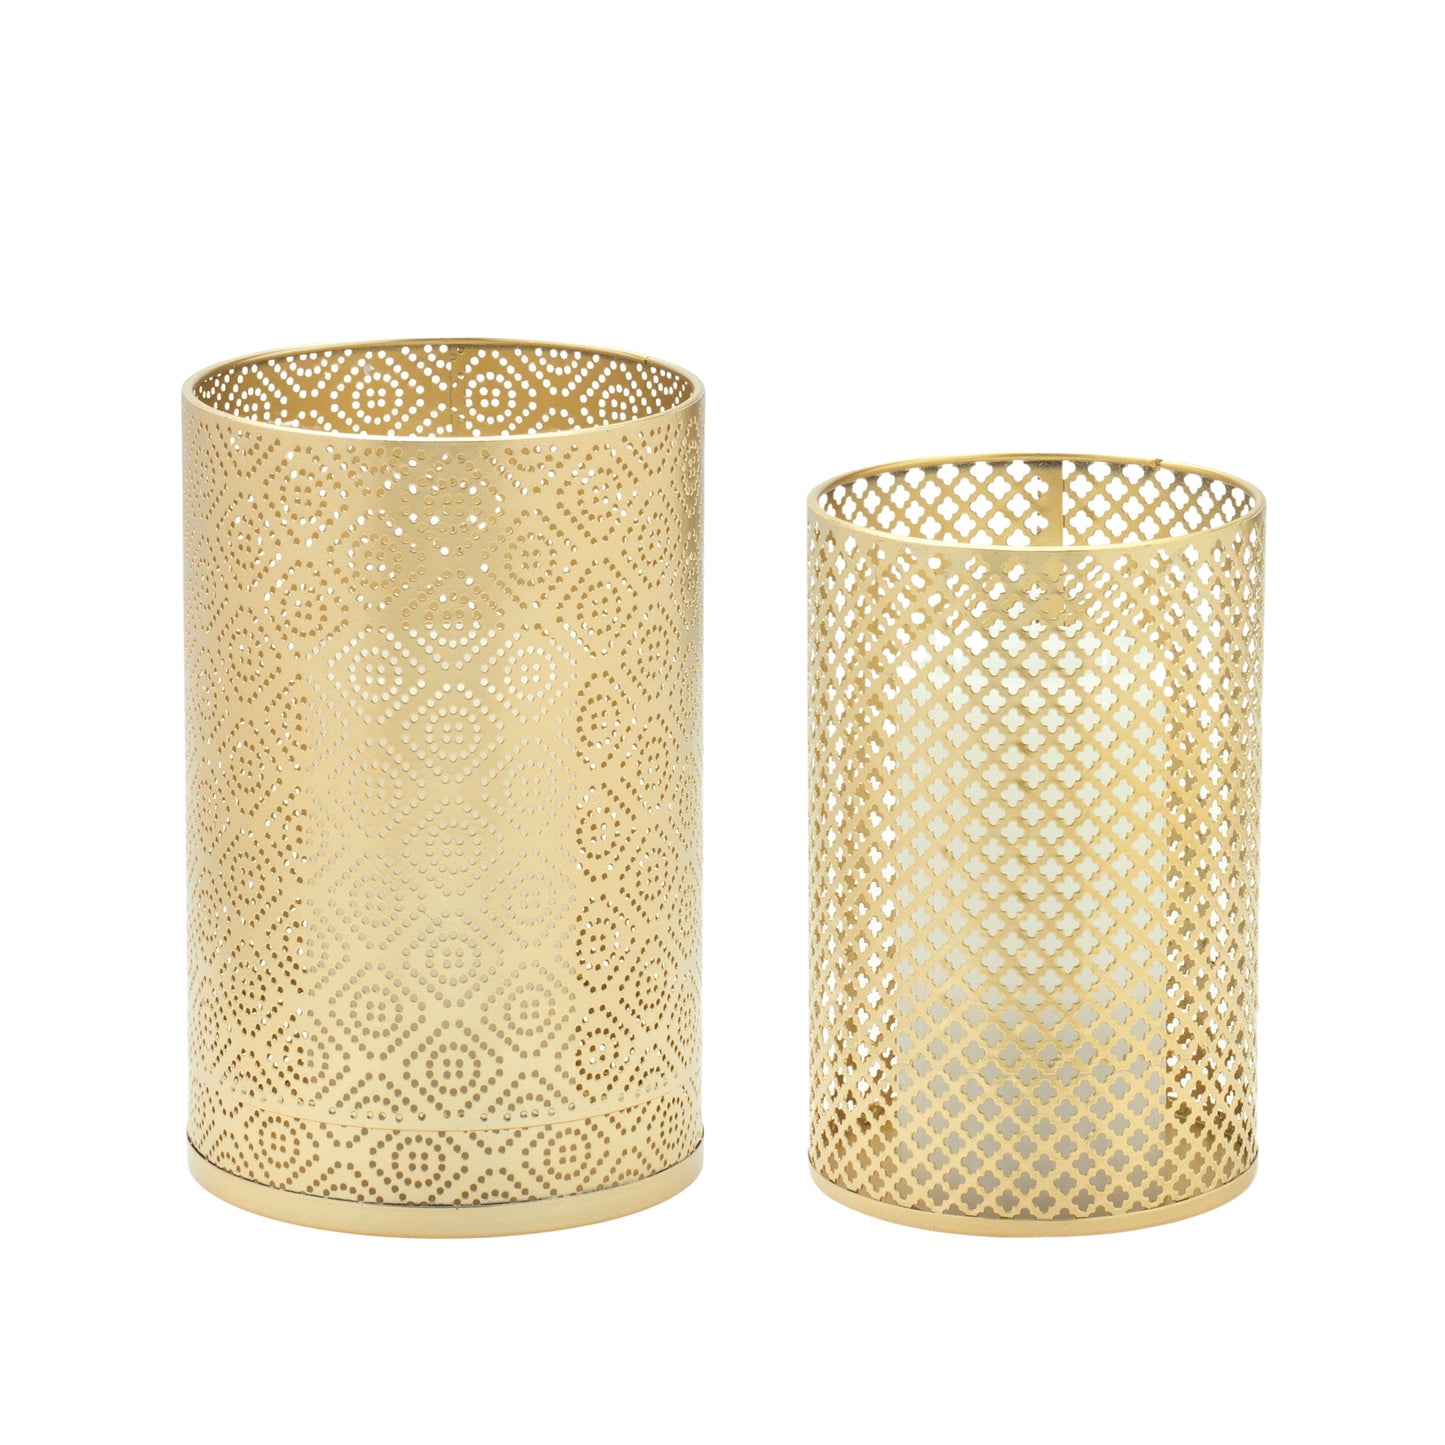  Iron metal candle holder, the chic gold finish paired with the ornate punched metal pattern